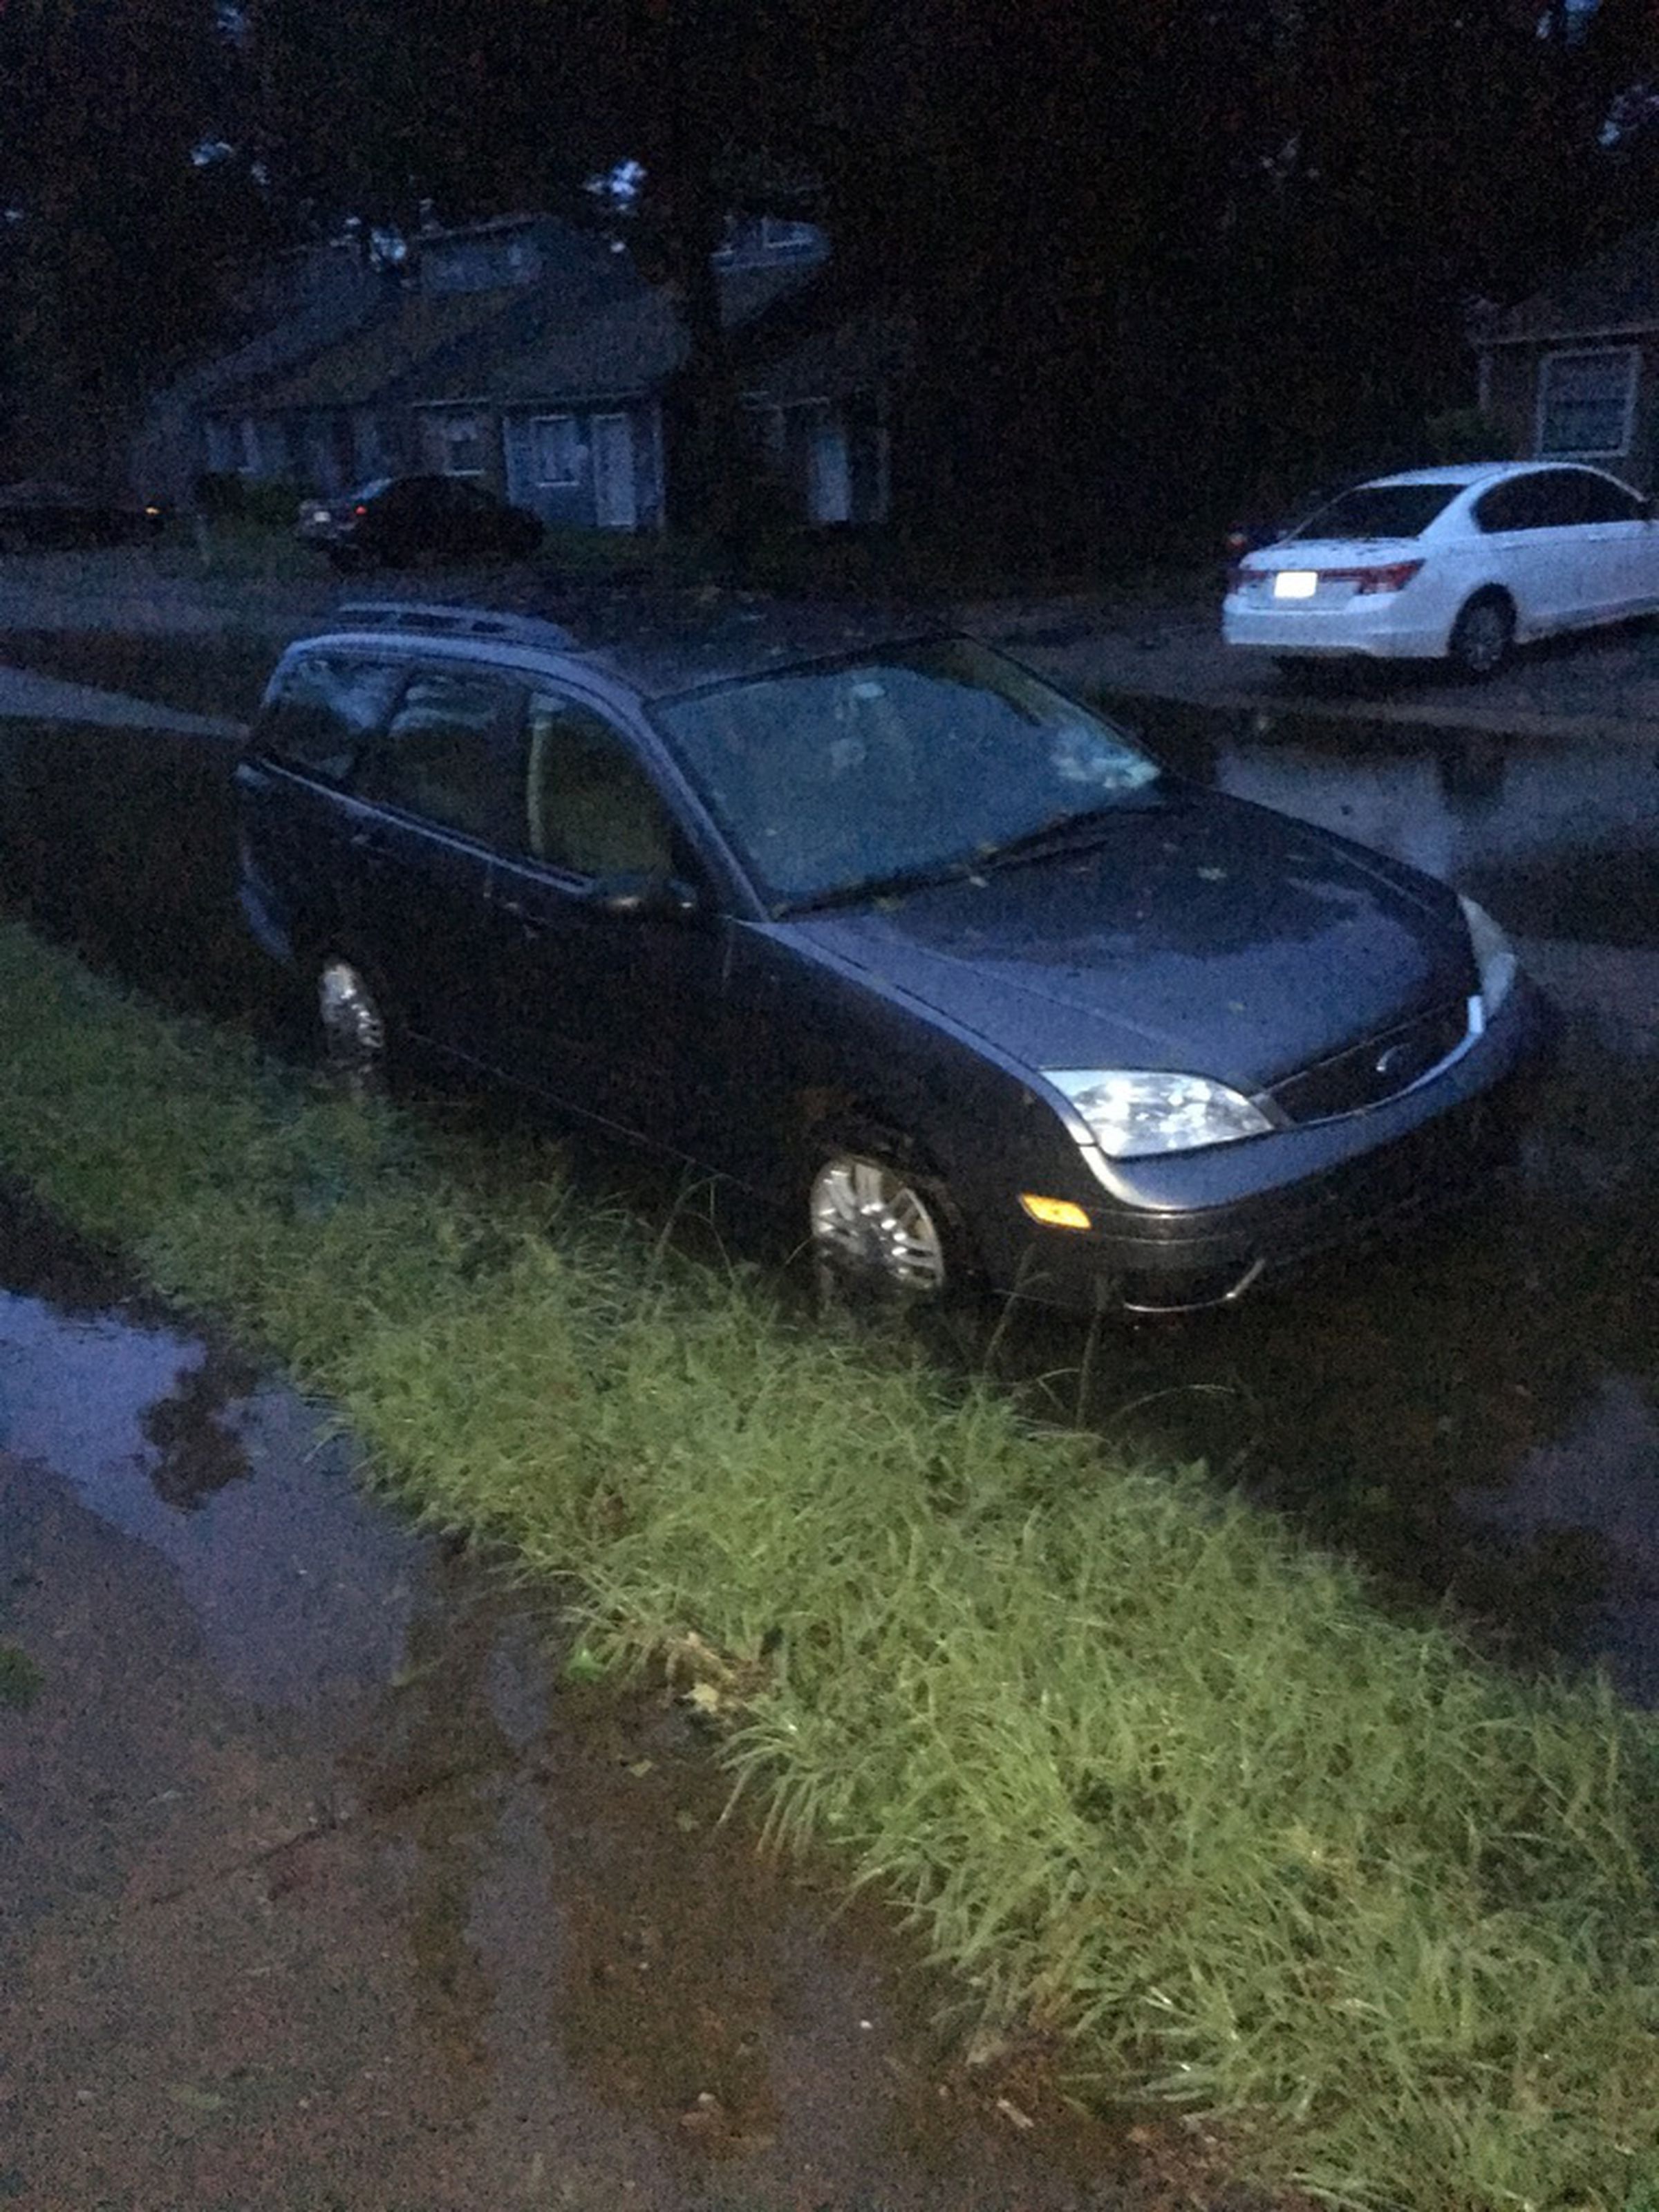 My car, full of water. Please excuse the iPhone 6S’s poor quality, my good camera was taking a swim inside the car.